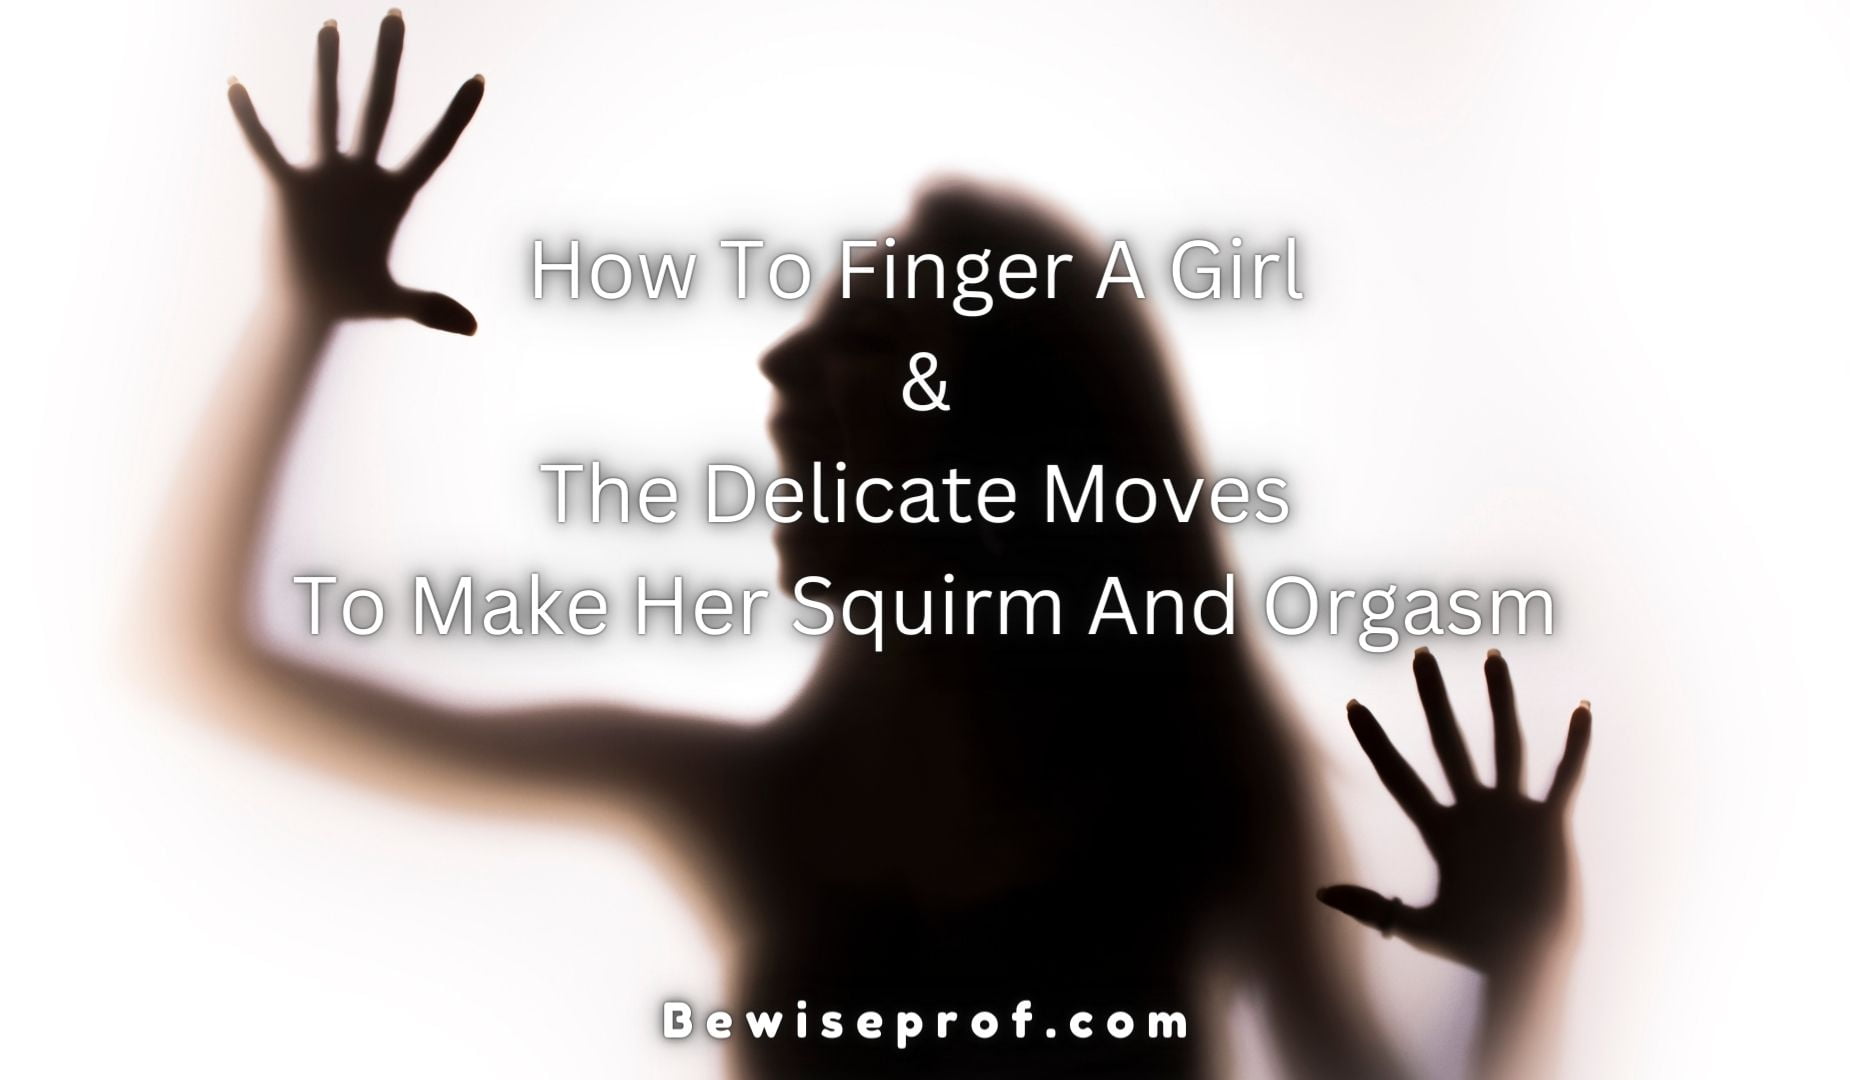 How To Finger A Girl And The Delicate Moves To Make Her Squirm And Orgasm